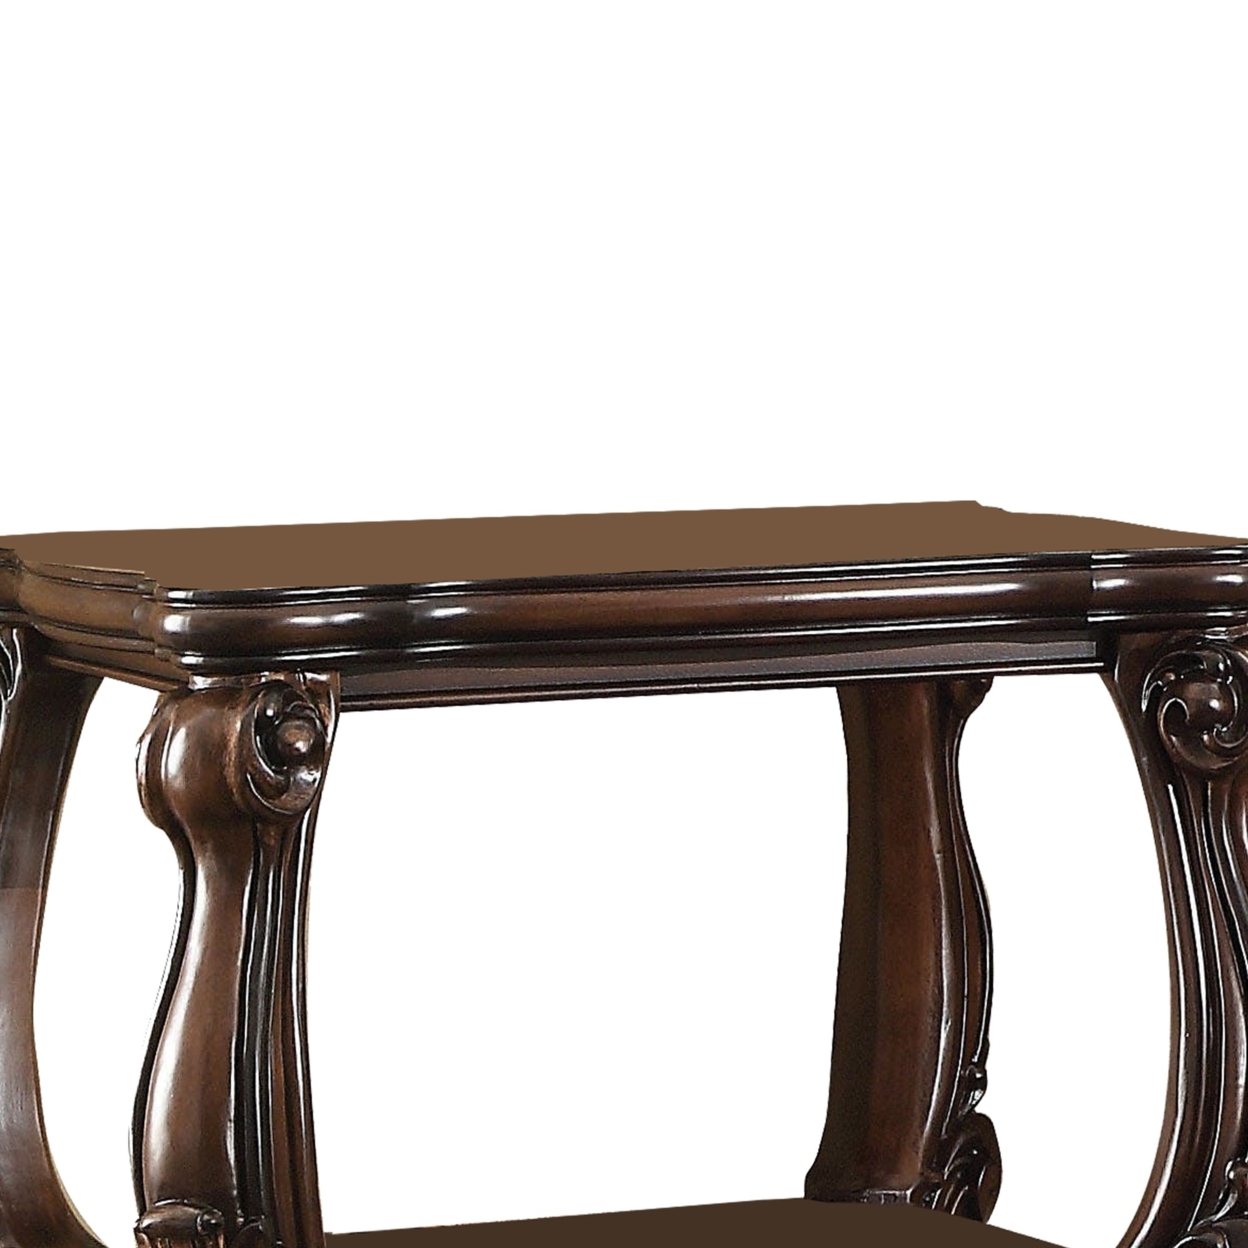 Wooden End Table With Bottom Shelf In Cherry Brown- Saltoro Sherpi